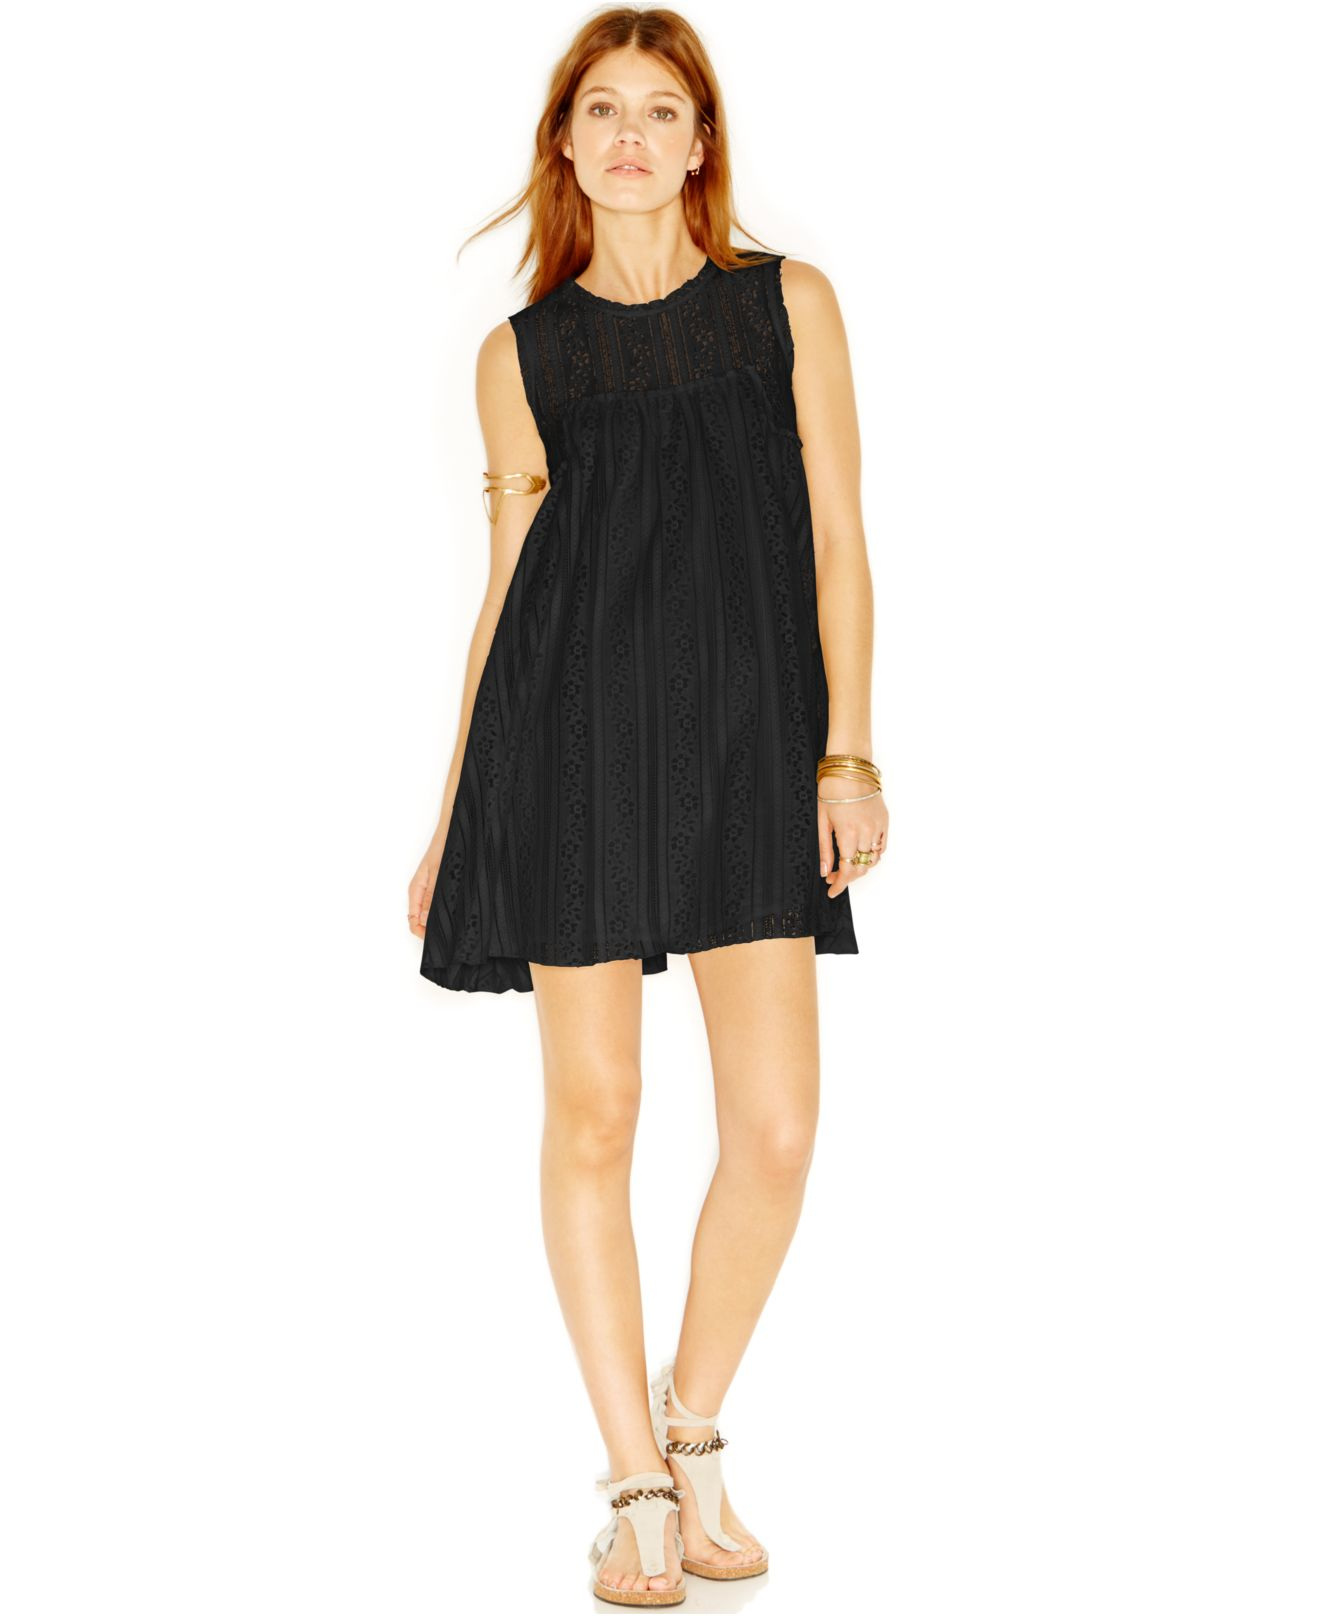 Free People Lace A-Line Shift Dress in Black | Lyst